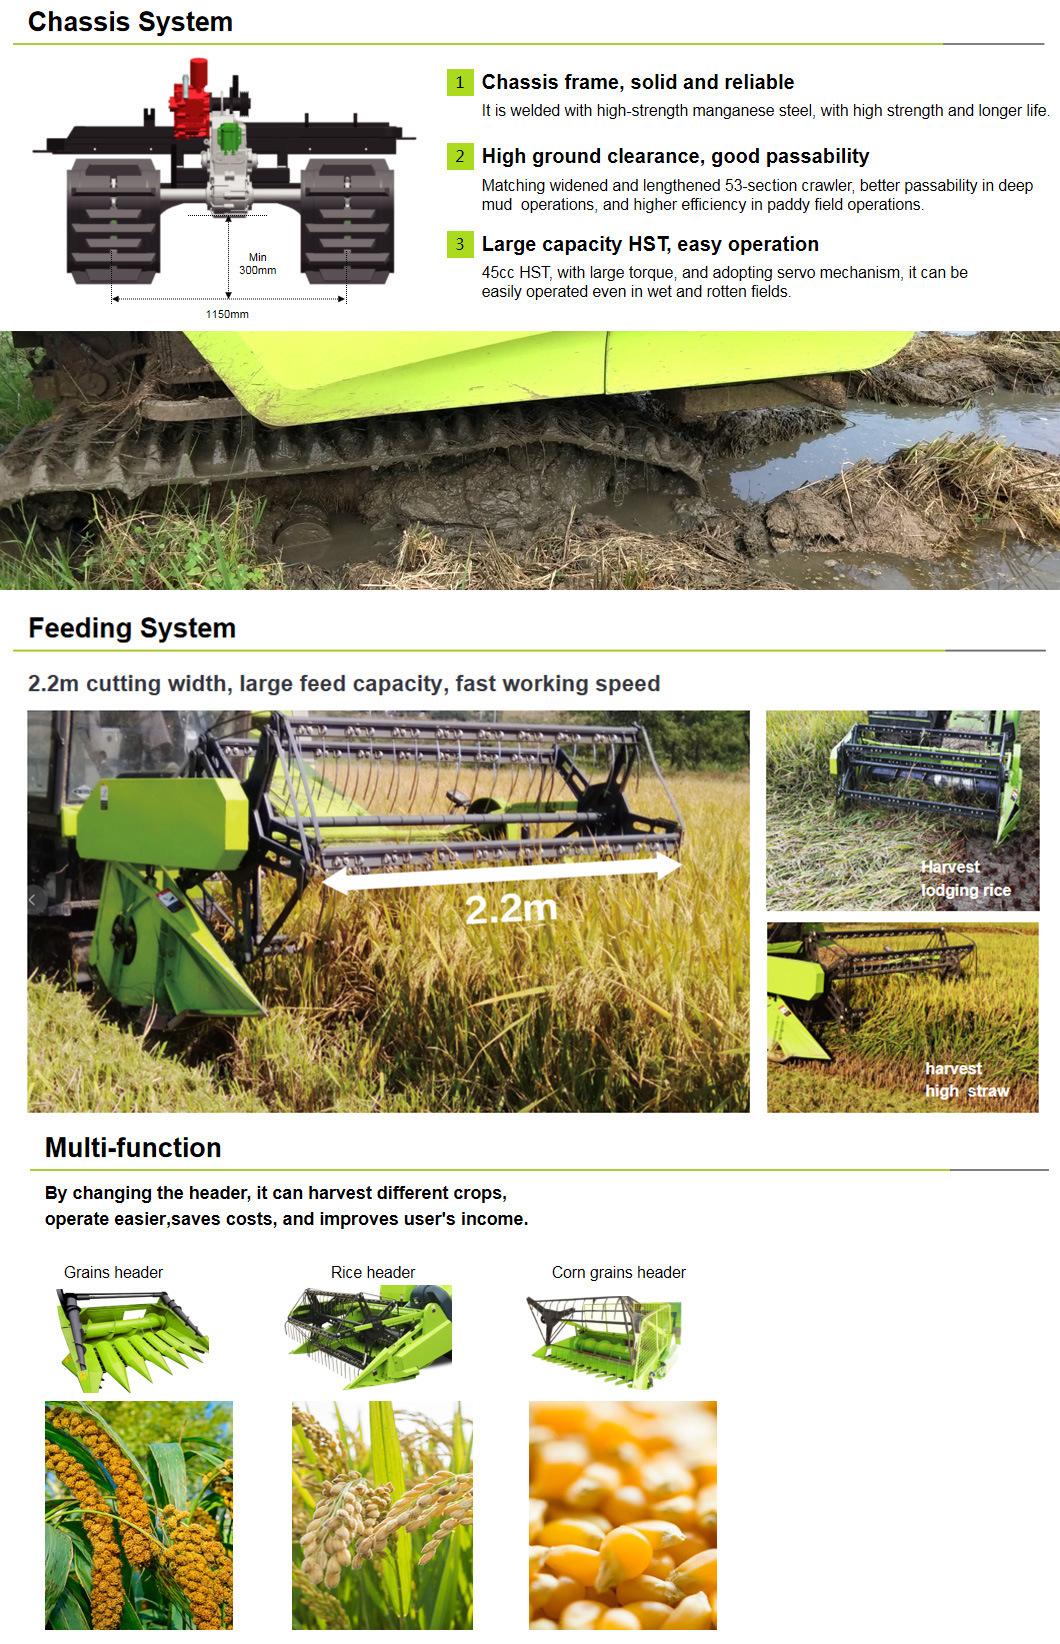 Zoomlion Rice Combine Wheat Harvester Double Drum Agriculture Machinery